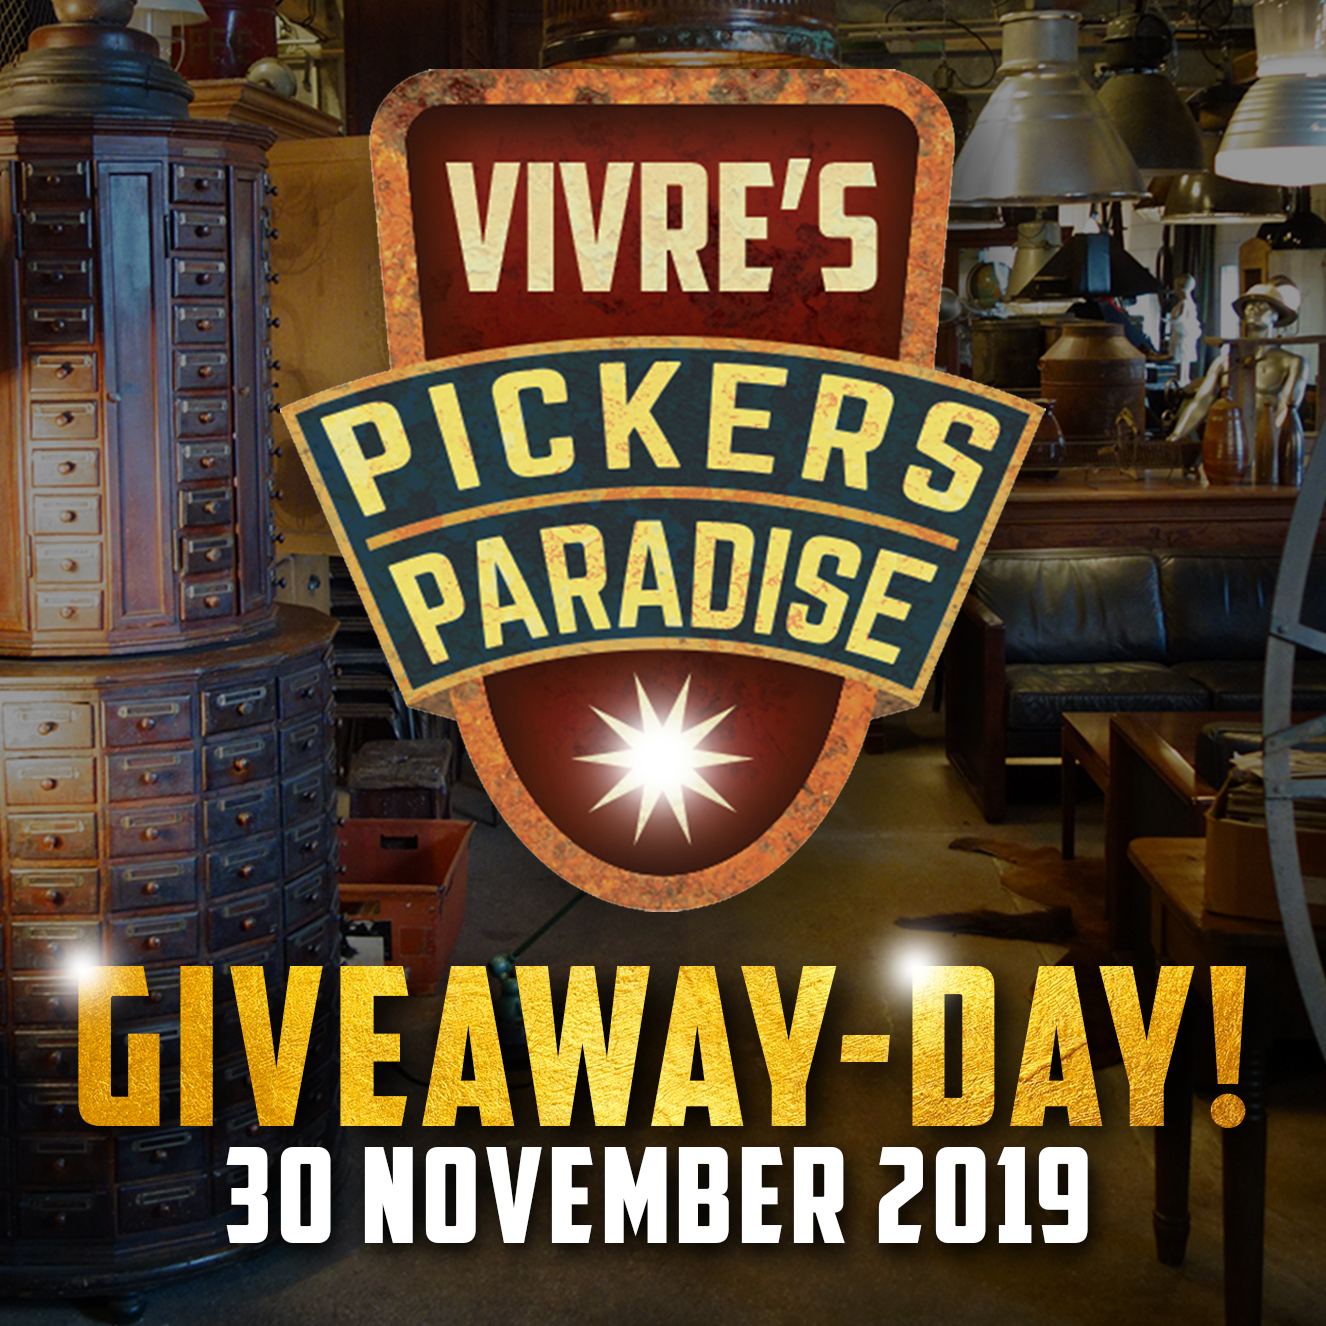 Vivre’s Pickers Paradise Giveaway-Day